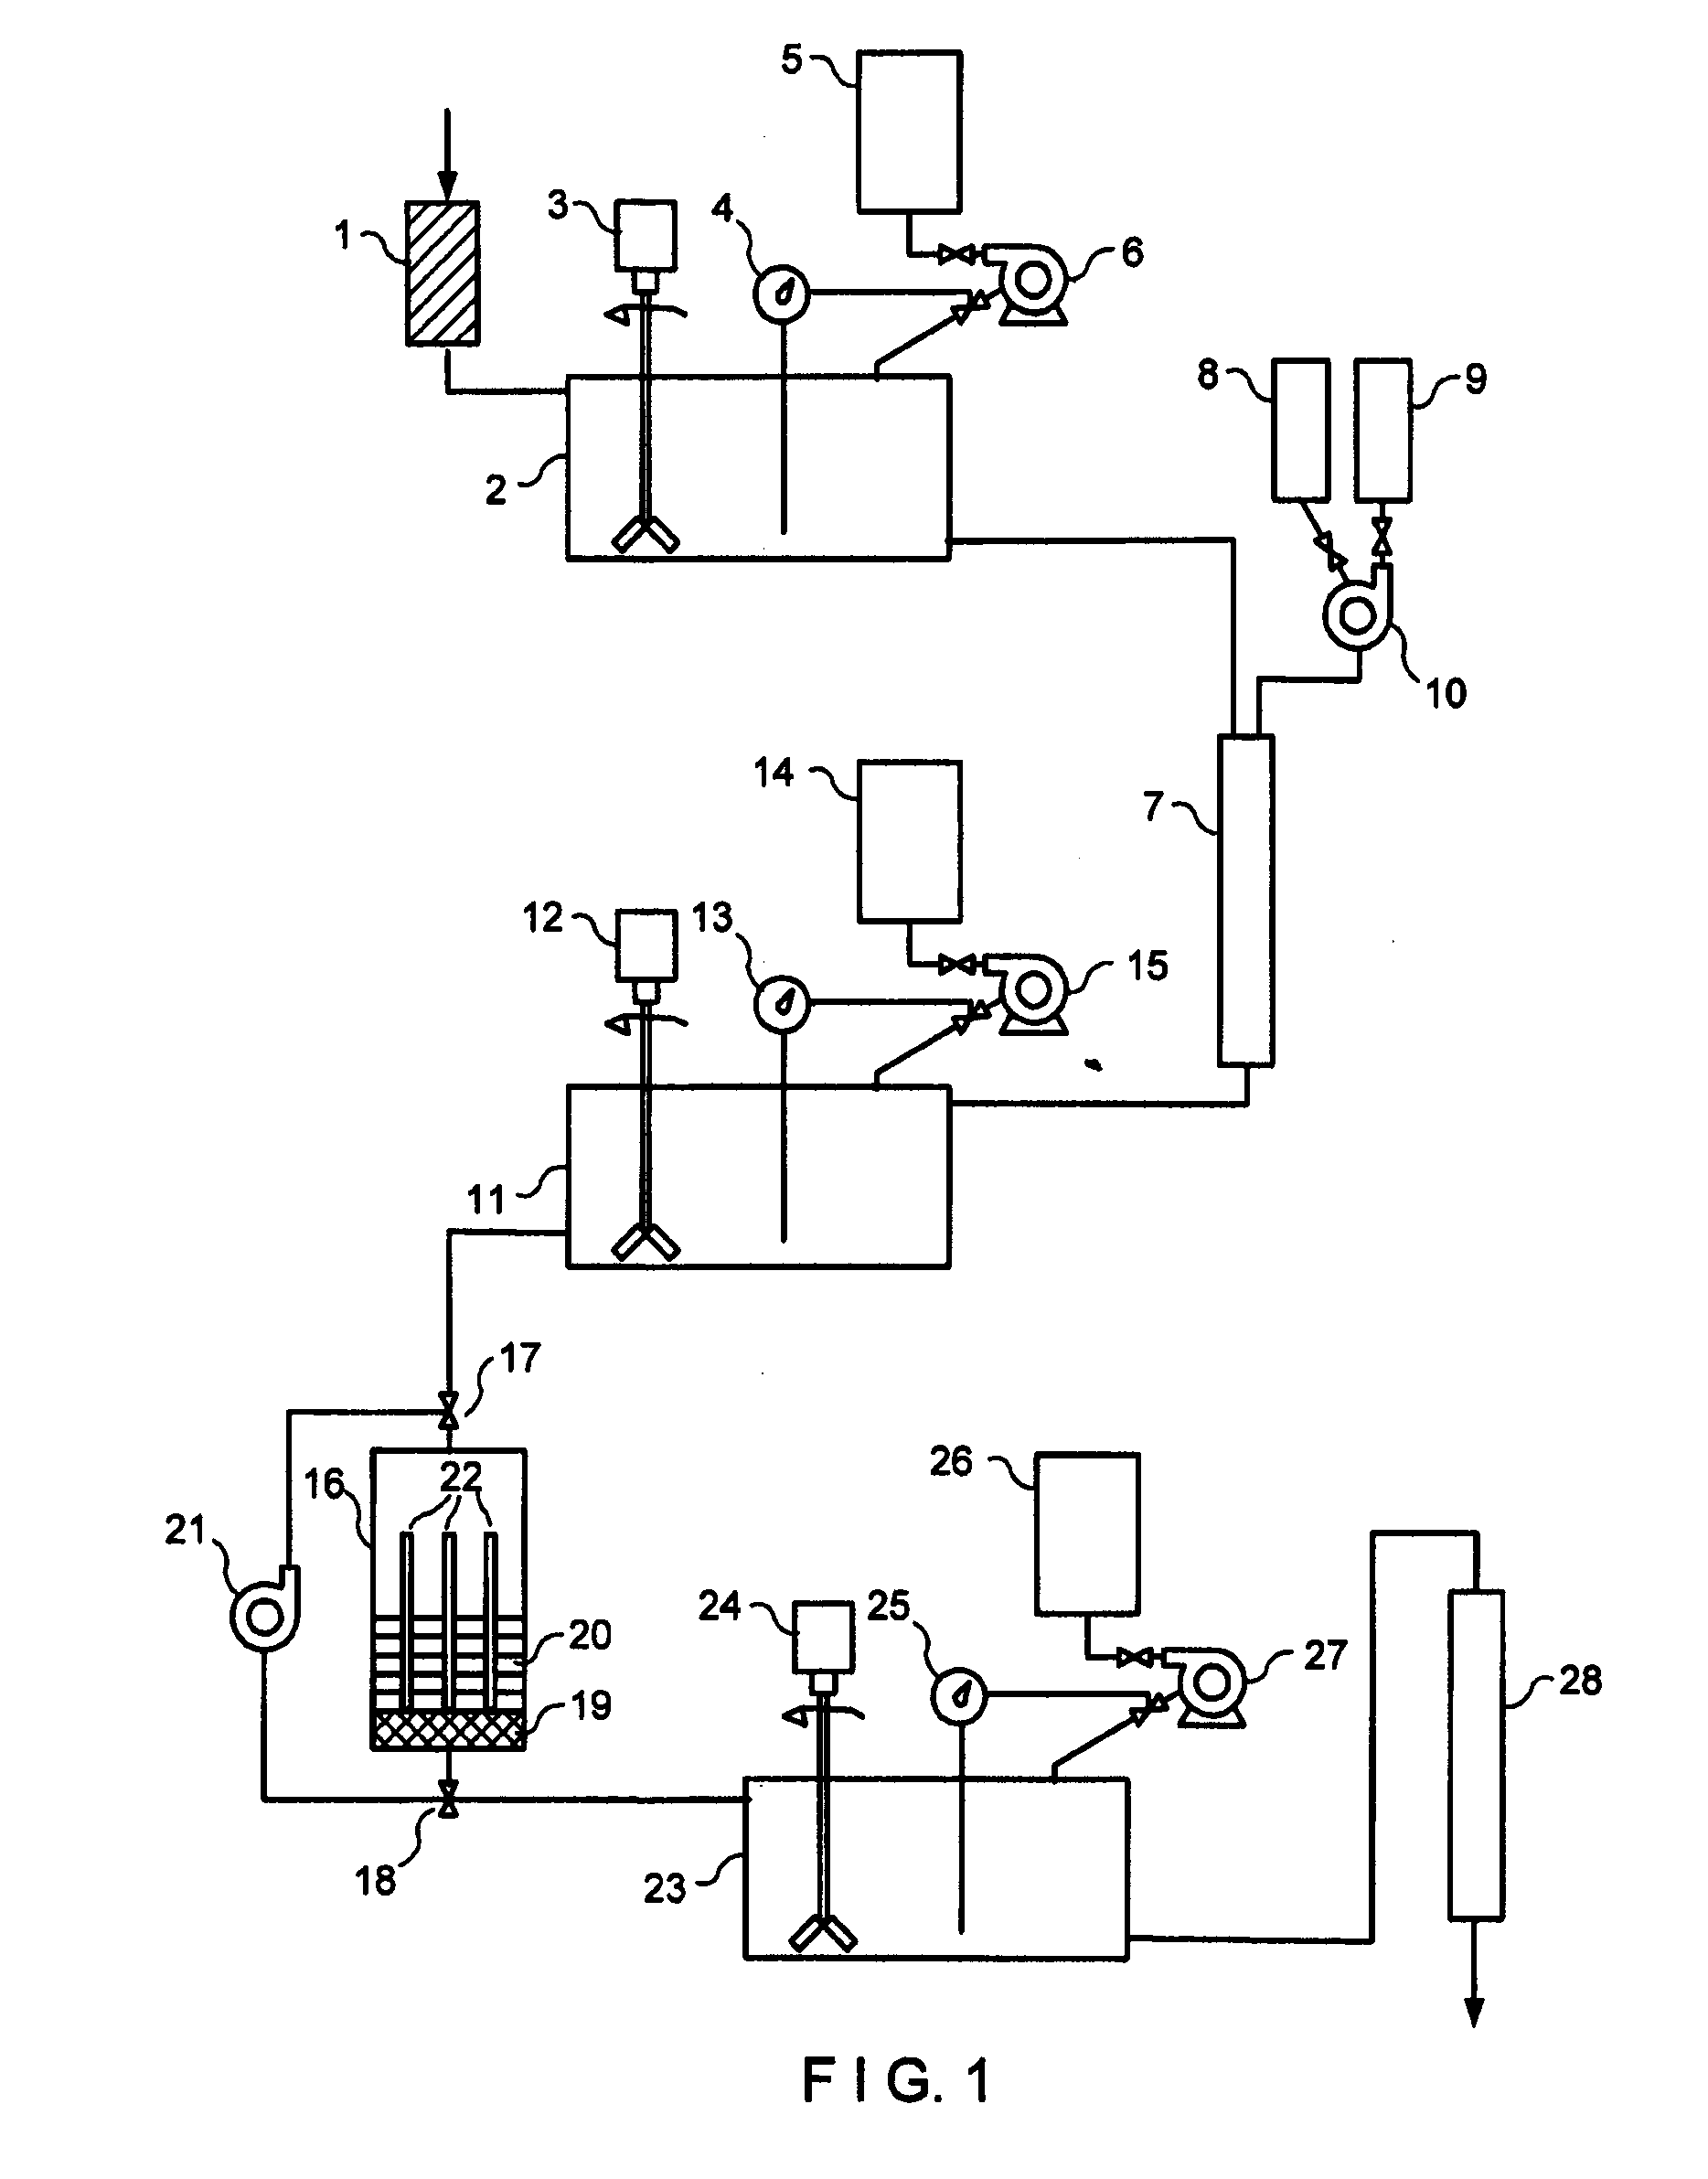 Method and device for decontaminating water which contains metal and/or is radioactively contaminated